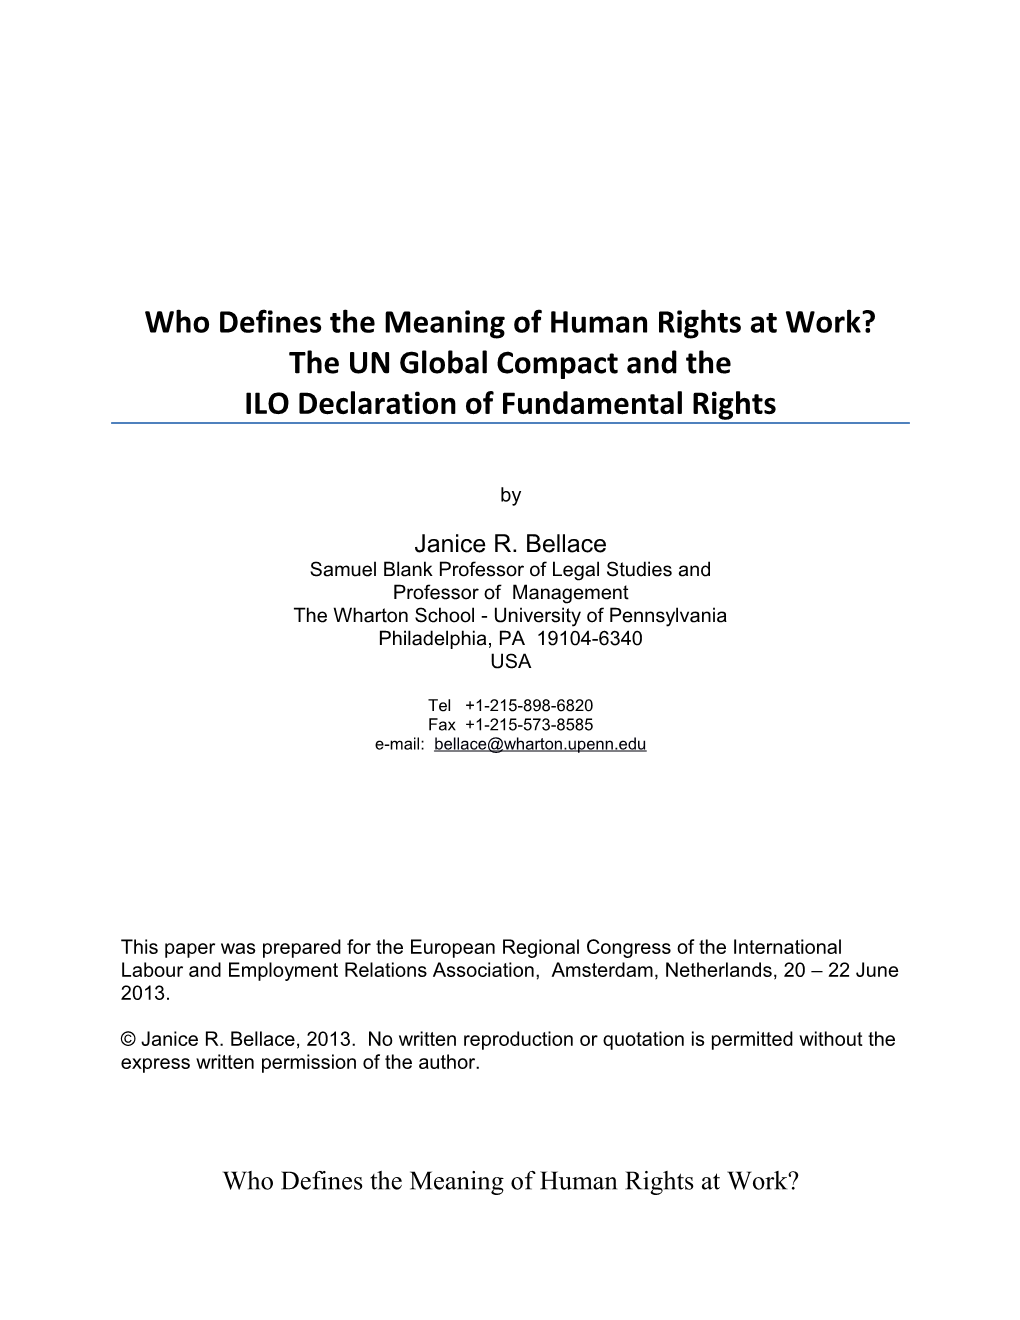 Who Defines the Meaning of Human Rights at Work? the UN Global Compact and the ILO Declaration